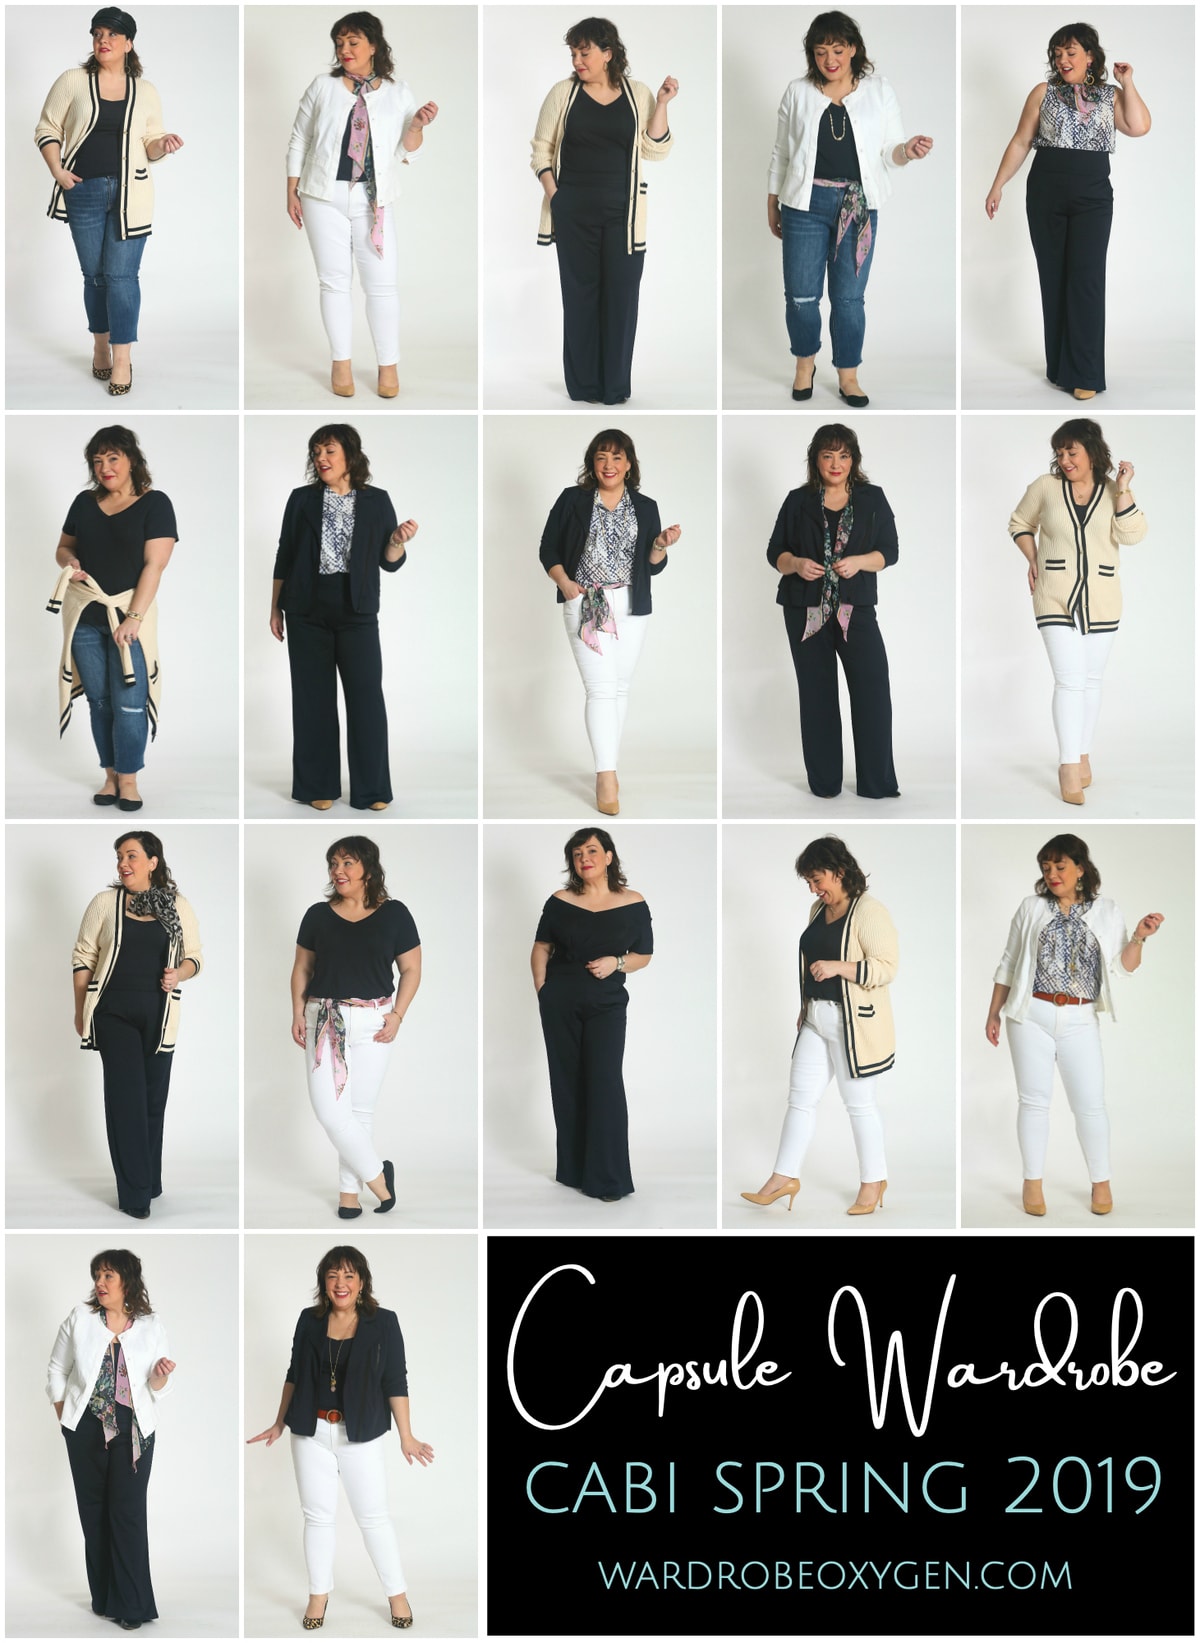 10 Fabulous & Fierce Fashions from Cabi's Fall 2019 Collection